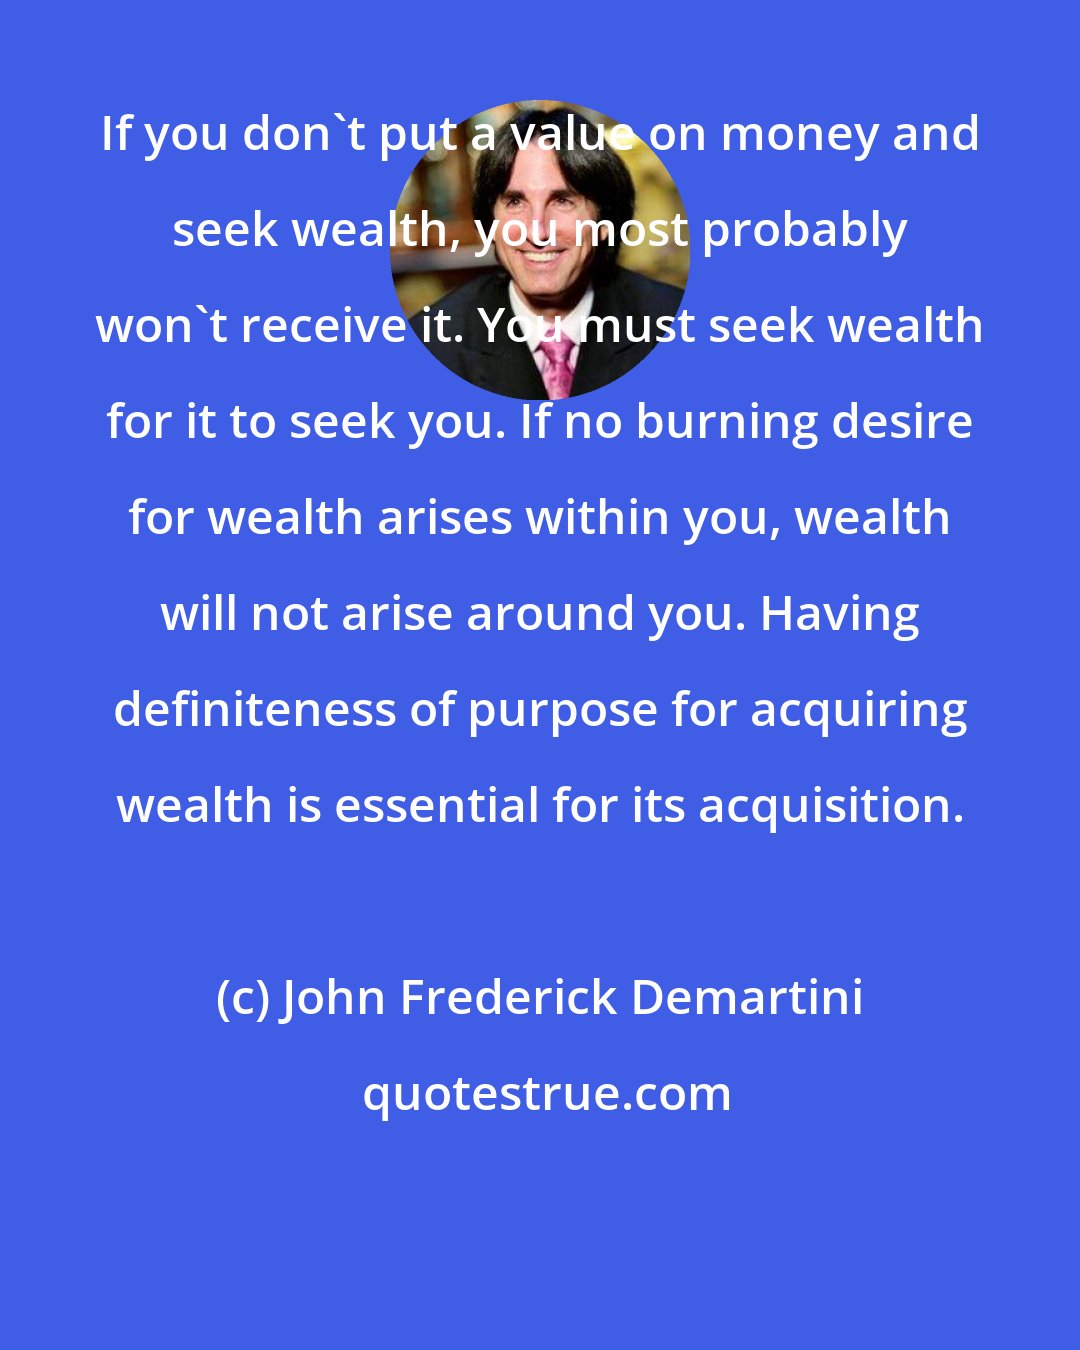 John Frederick Demartini: If you don't put a value on money and seek wealth, you most probably won't receive it. You must seek wealth for it to seek you. If no burning desire for wealth arises within you, wealth will not arise around you. Having definiteness of purpose for acquiring wealth is essential for its acquisition.